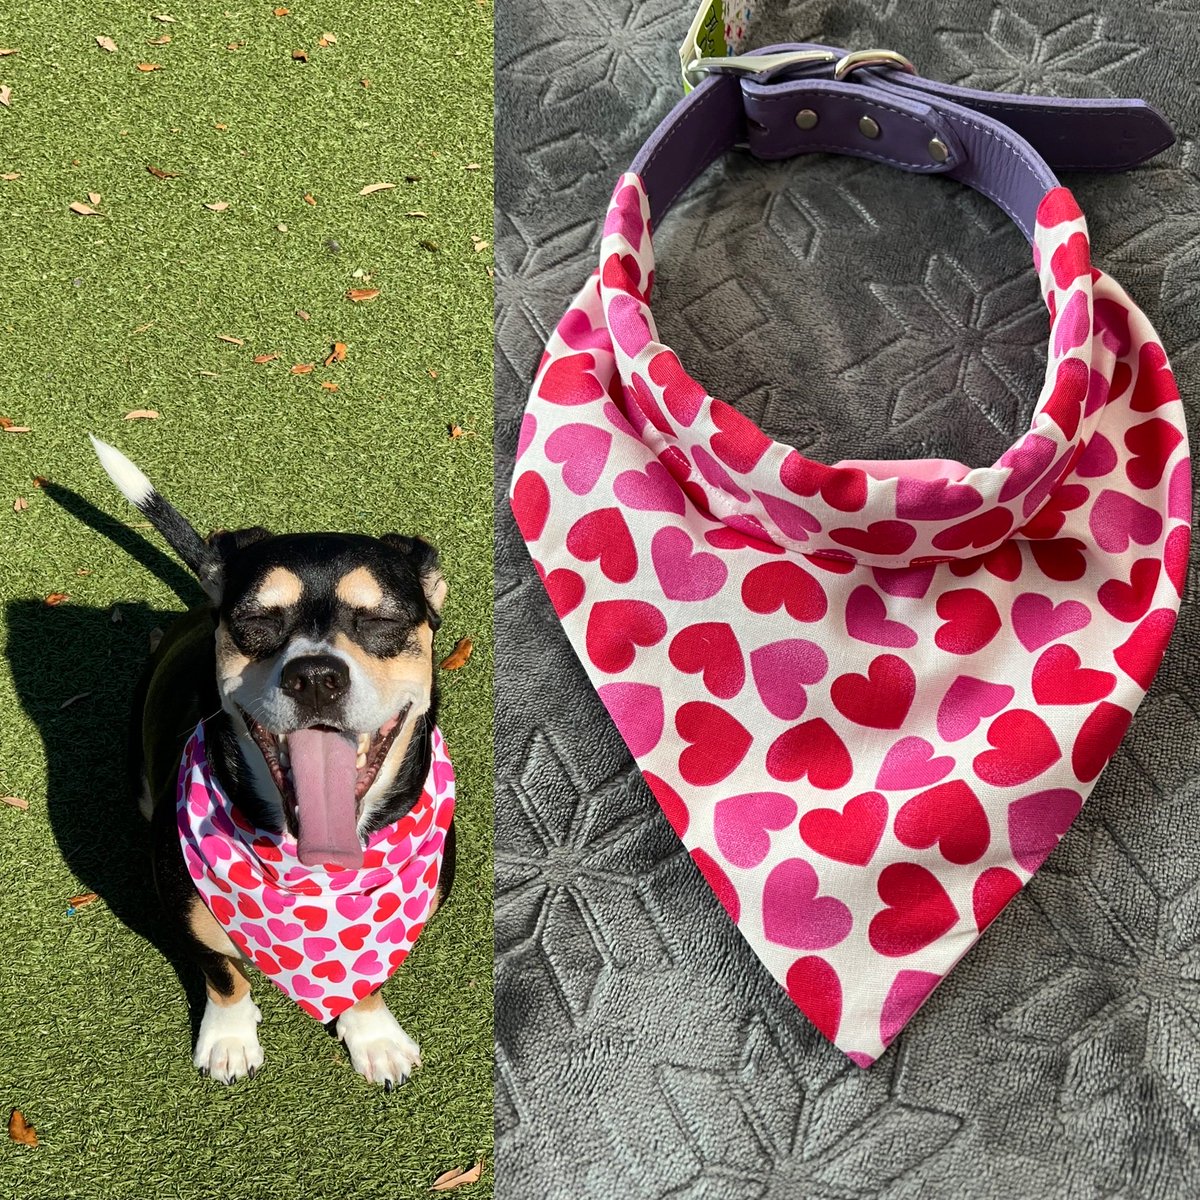 Available in my shop check it out #smallbusiness #valentinebandana #handmade #etsy #ersyshop #fridayvibes #dogslover #dogmom #petaccessories #valentinegift 🐾🐶